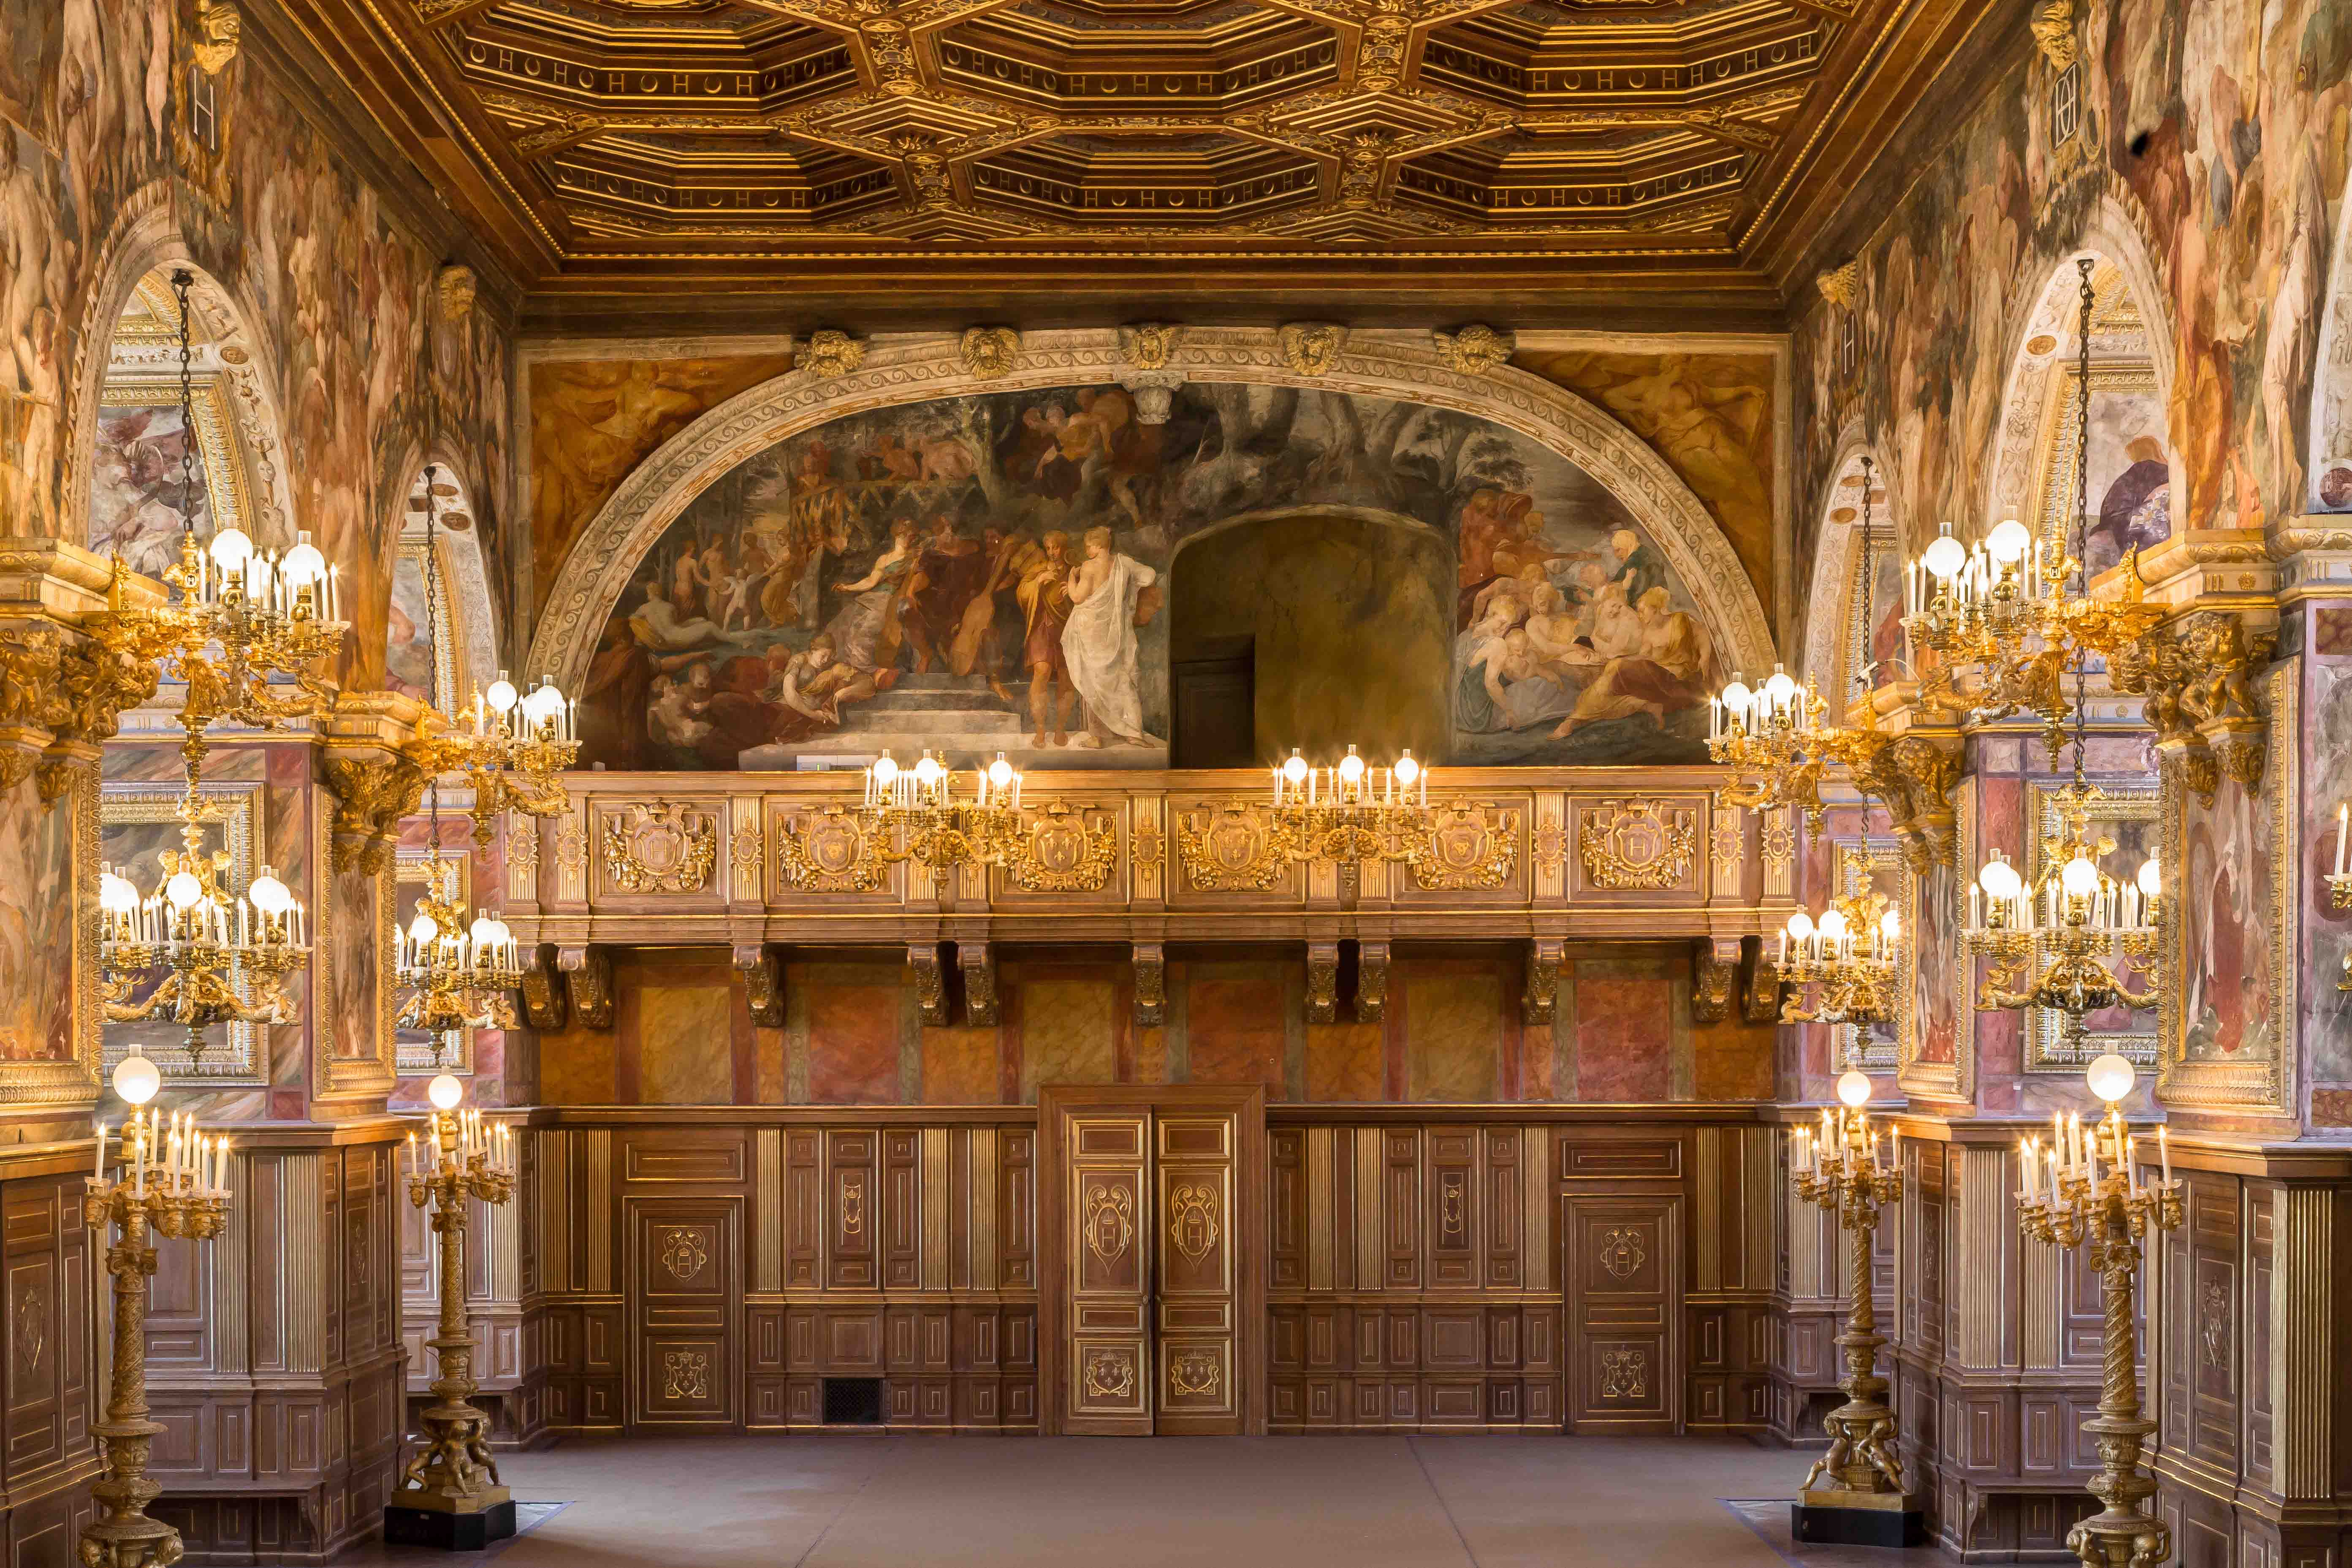 The Interiors of Chateau Fontainebleau